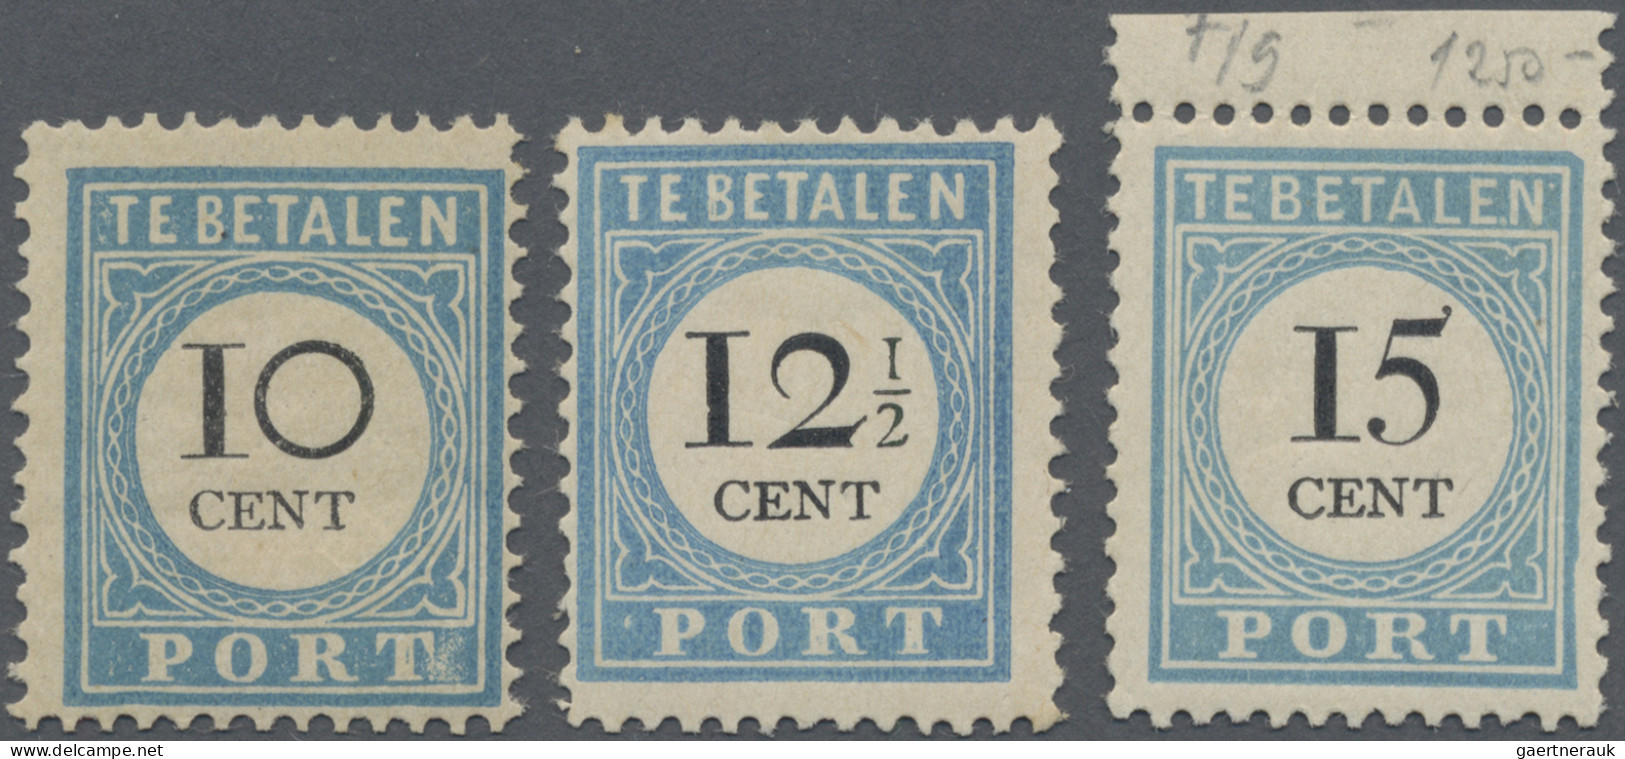 Netherlands - Postage Dues: 1881/1887, Postage Dues, 10 C, 12½ C And 15 C, Mnh. - Postage Due